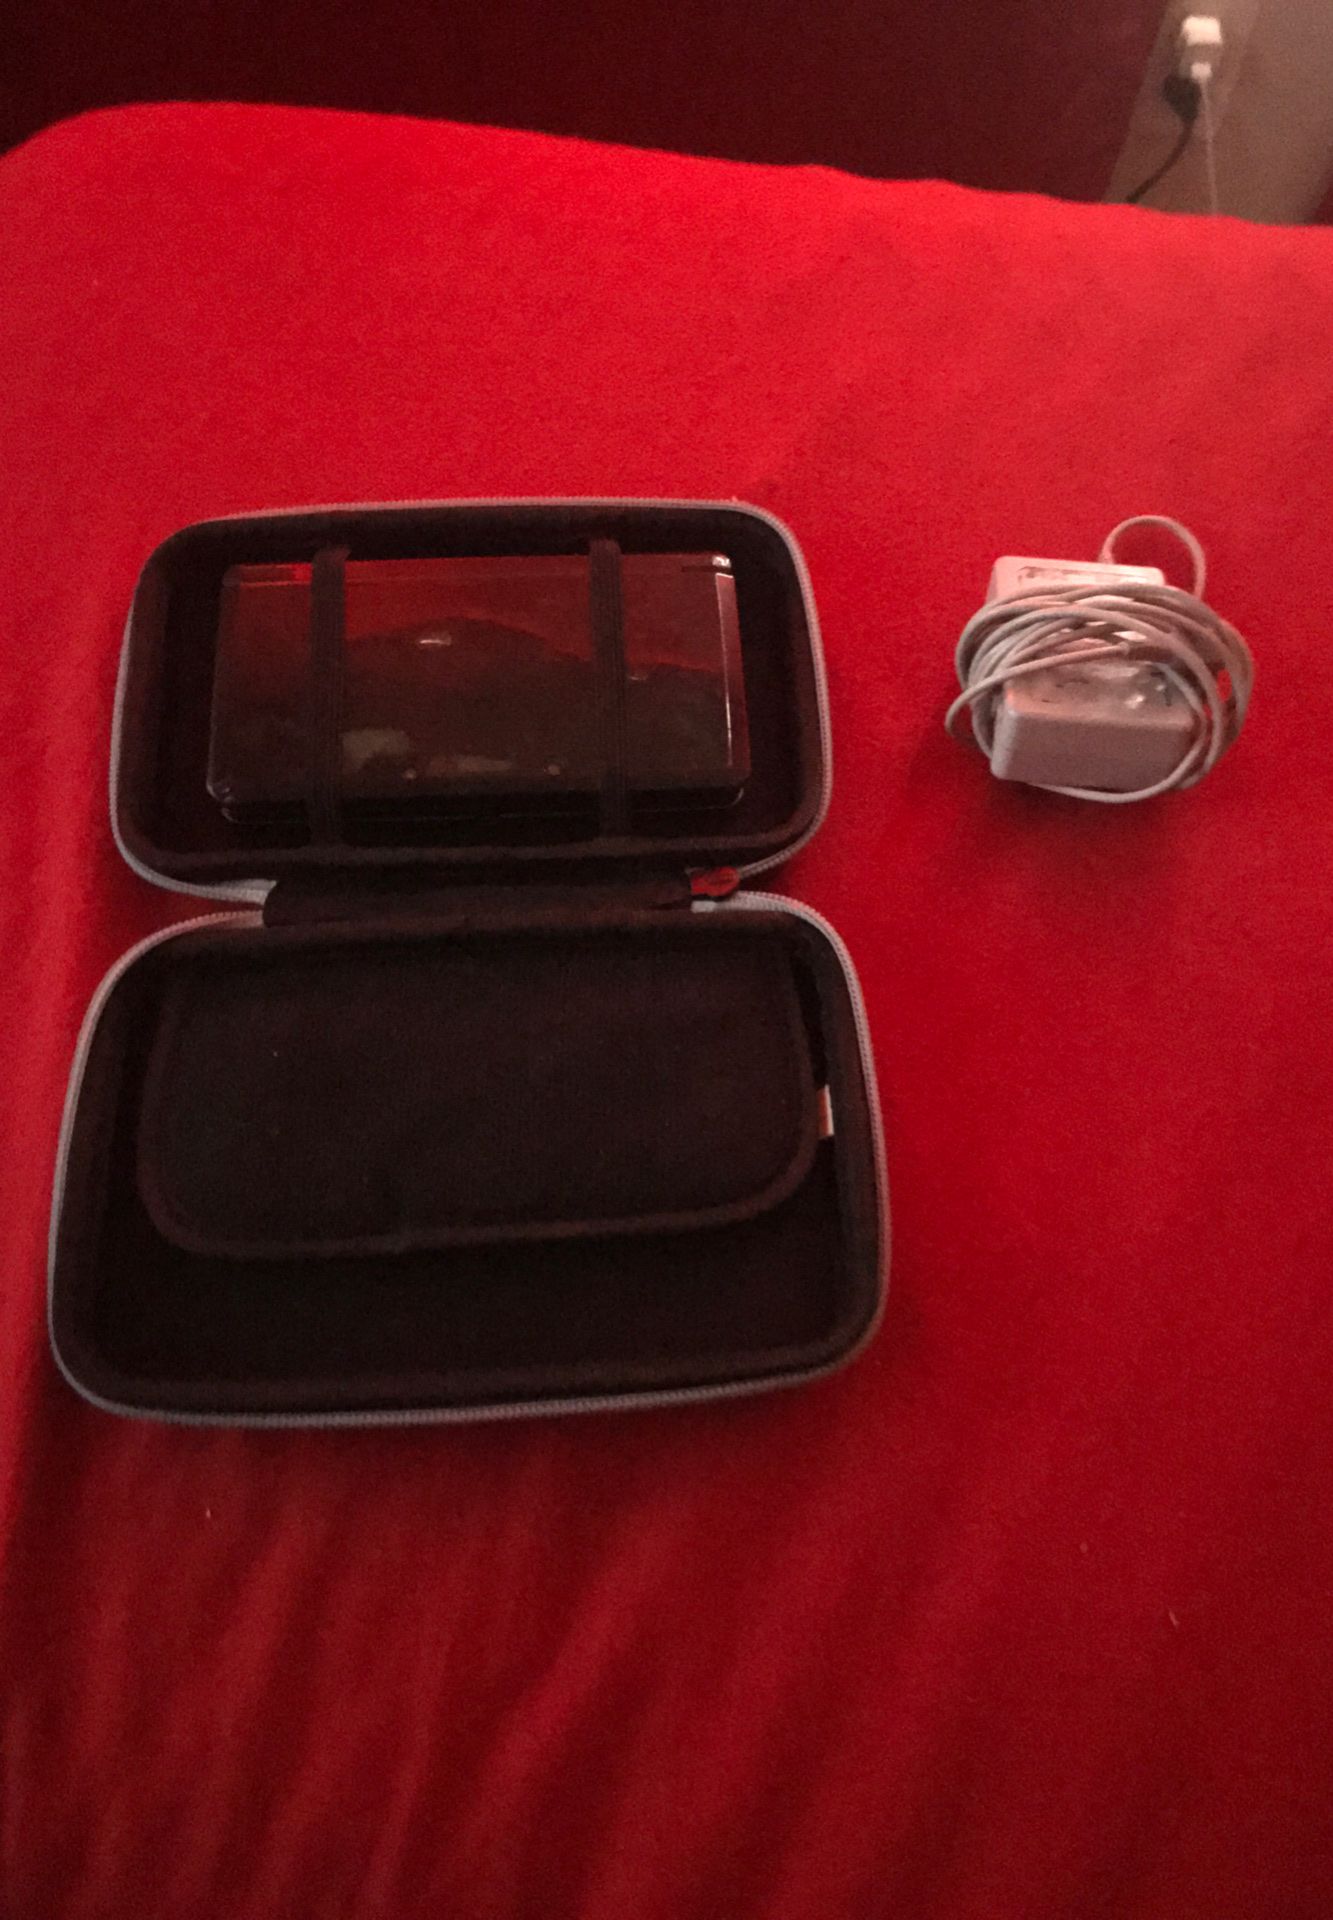 Nintendo 3DS with a case and charger (no games)